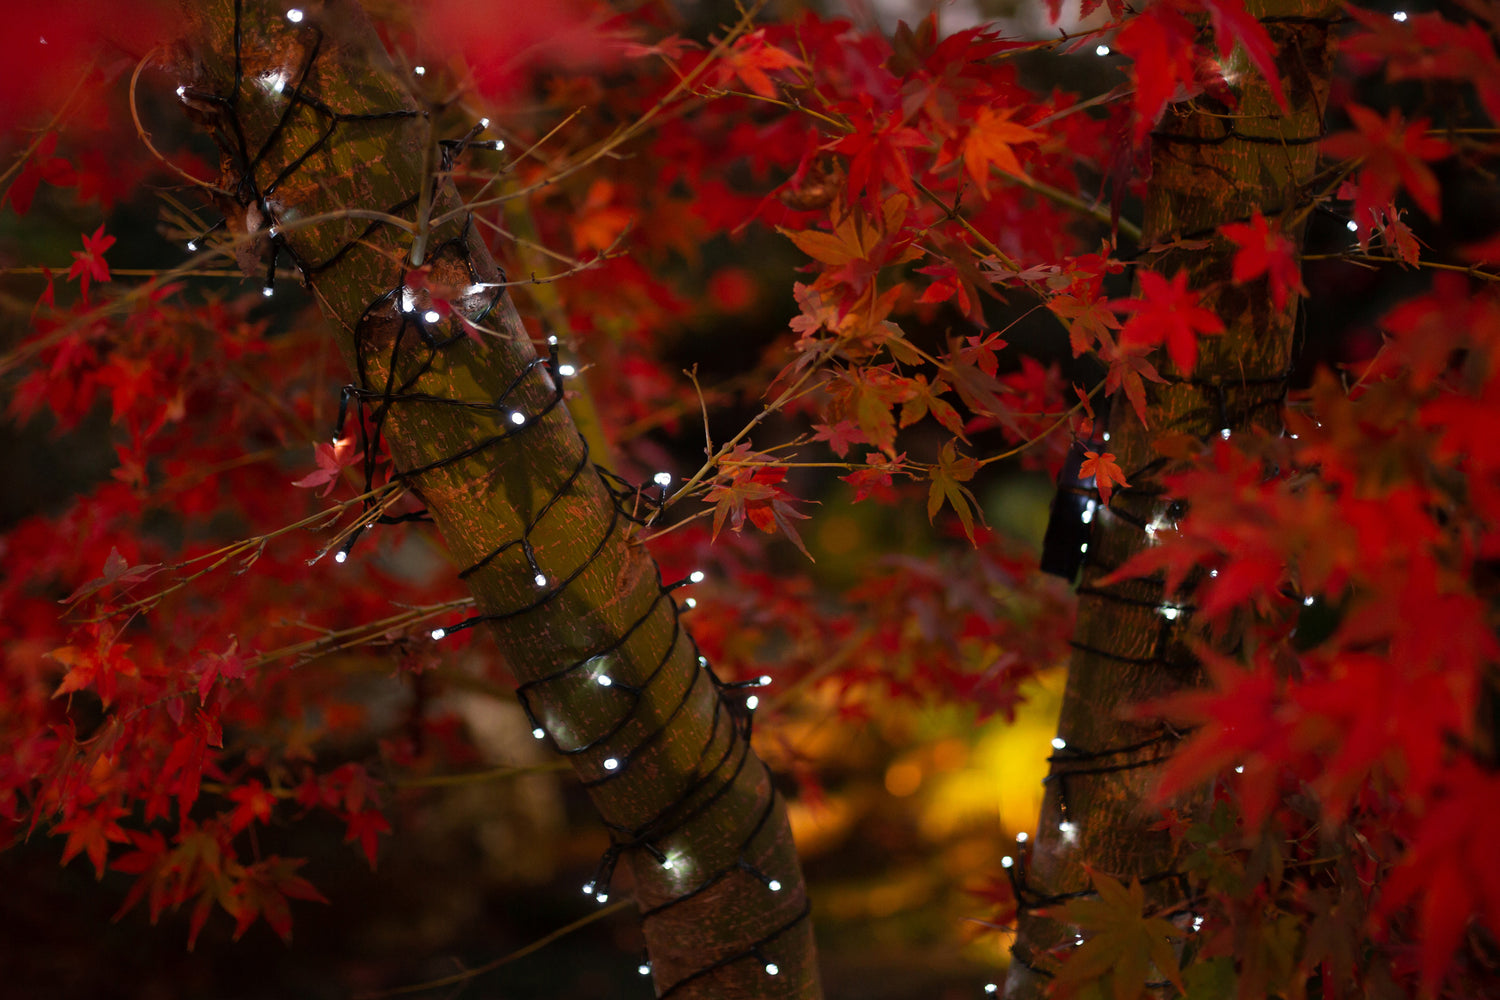 Cool white solar fairy lights wrapped around a tree with beautiful red autumn leaves